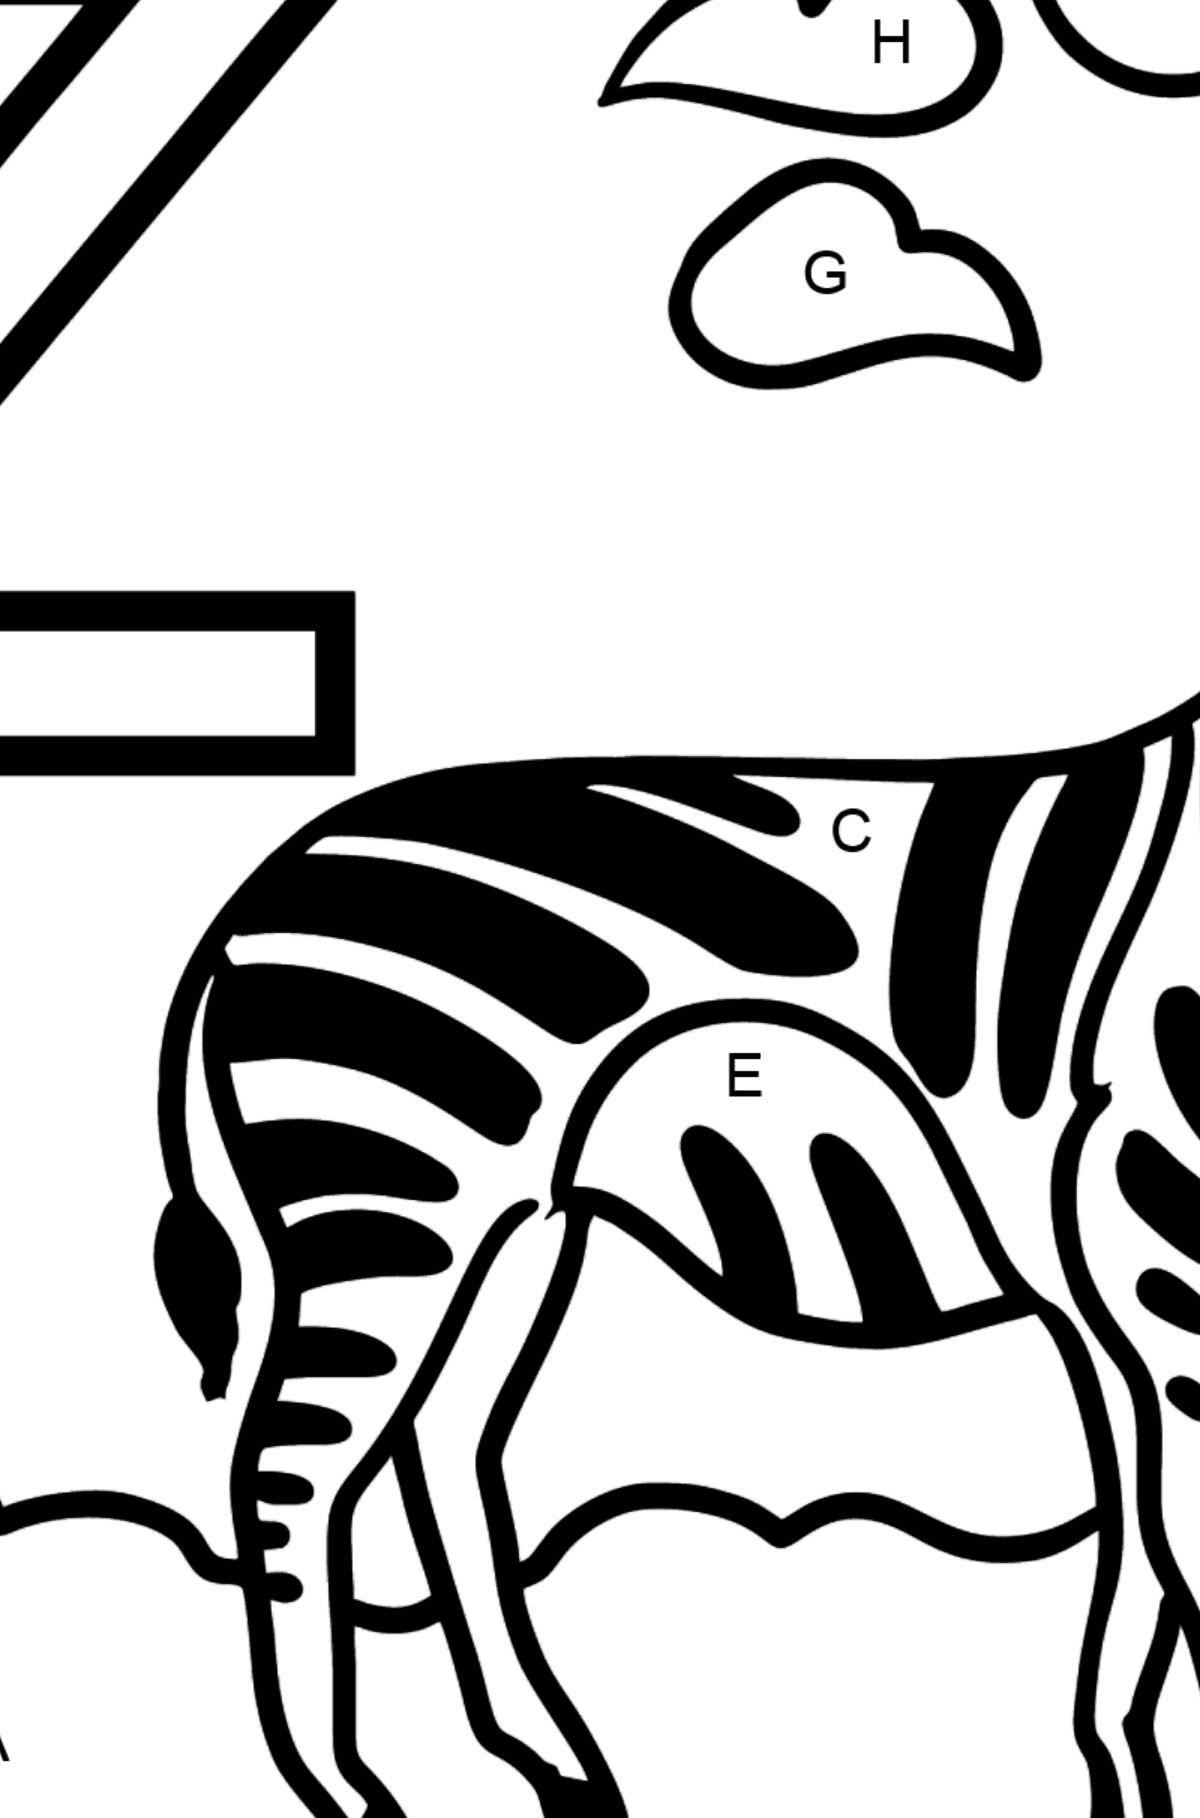 Portuguese Letter Z coloring pages - ZEBRA - Coloring by Letters for Kids